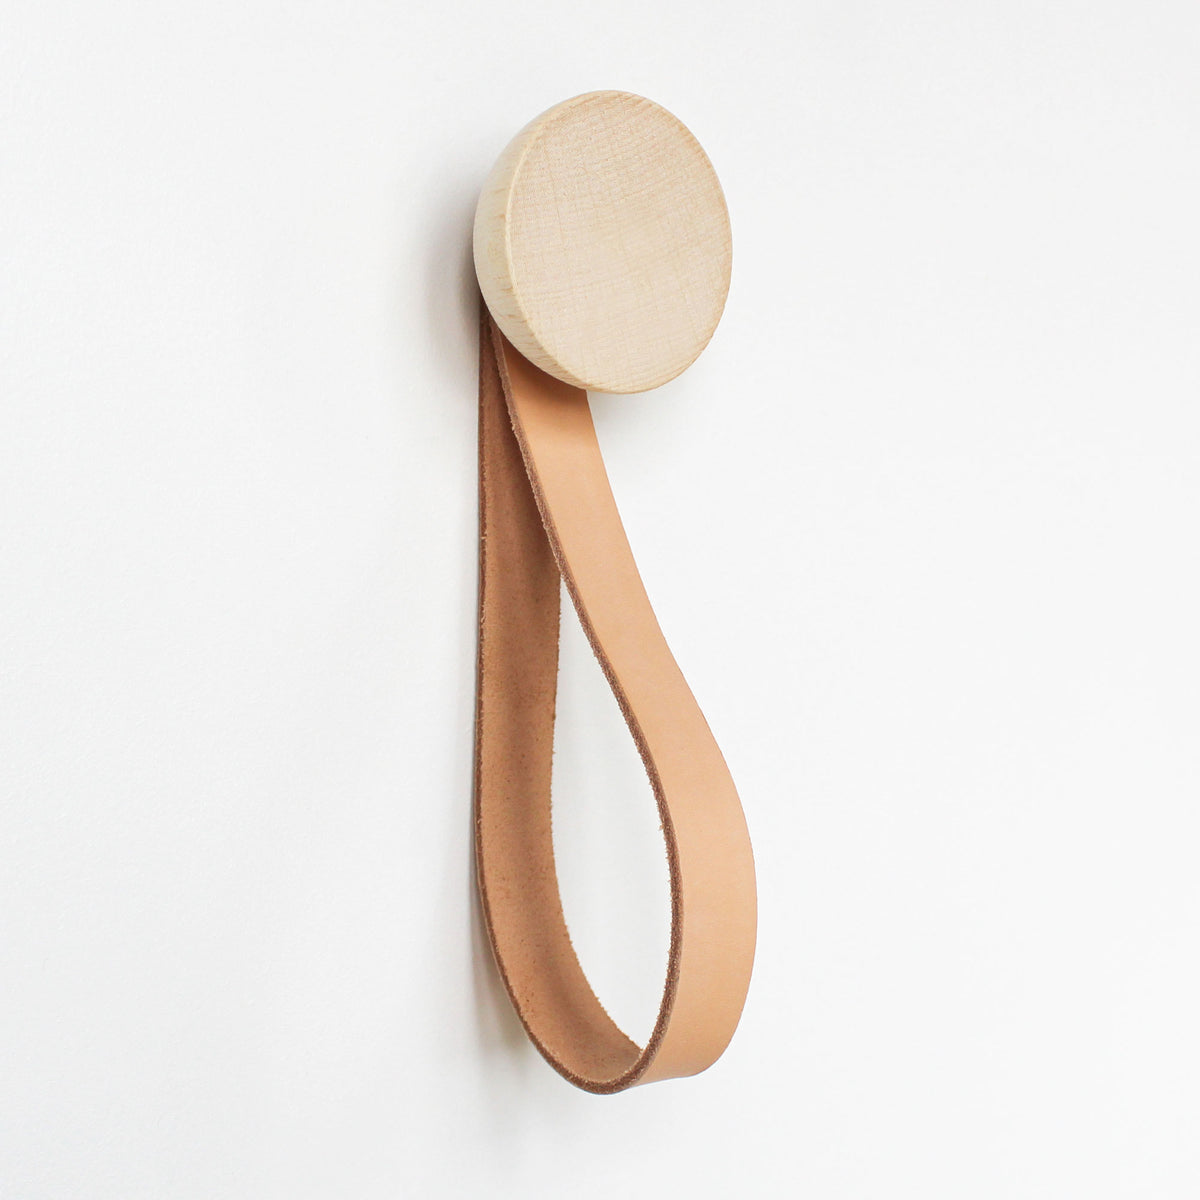 Small Beech Wood Wall Mounted Coat Hook With Leather Strap - Holistic Habitat 